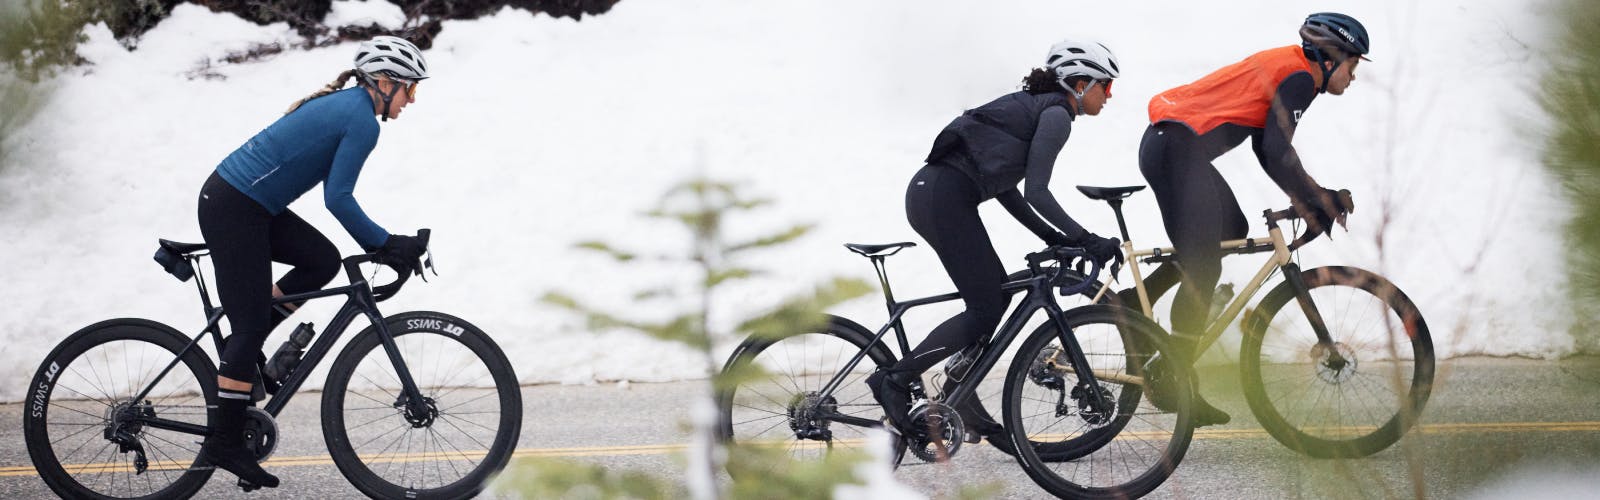 Discover the latest in Winter Cycling Wear: The PURE range from